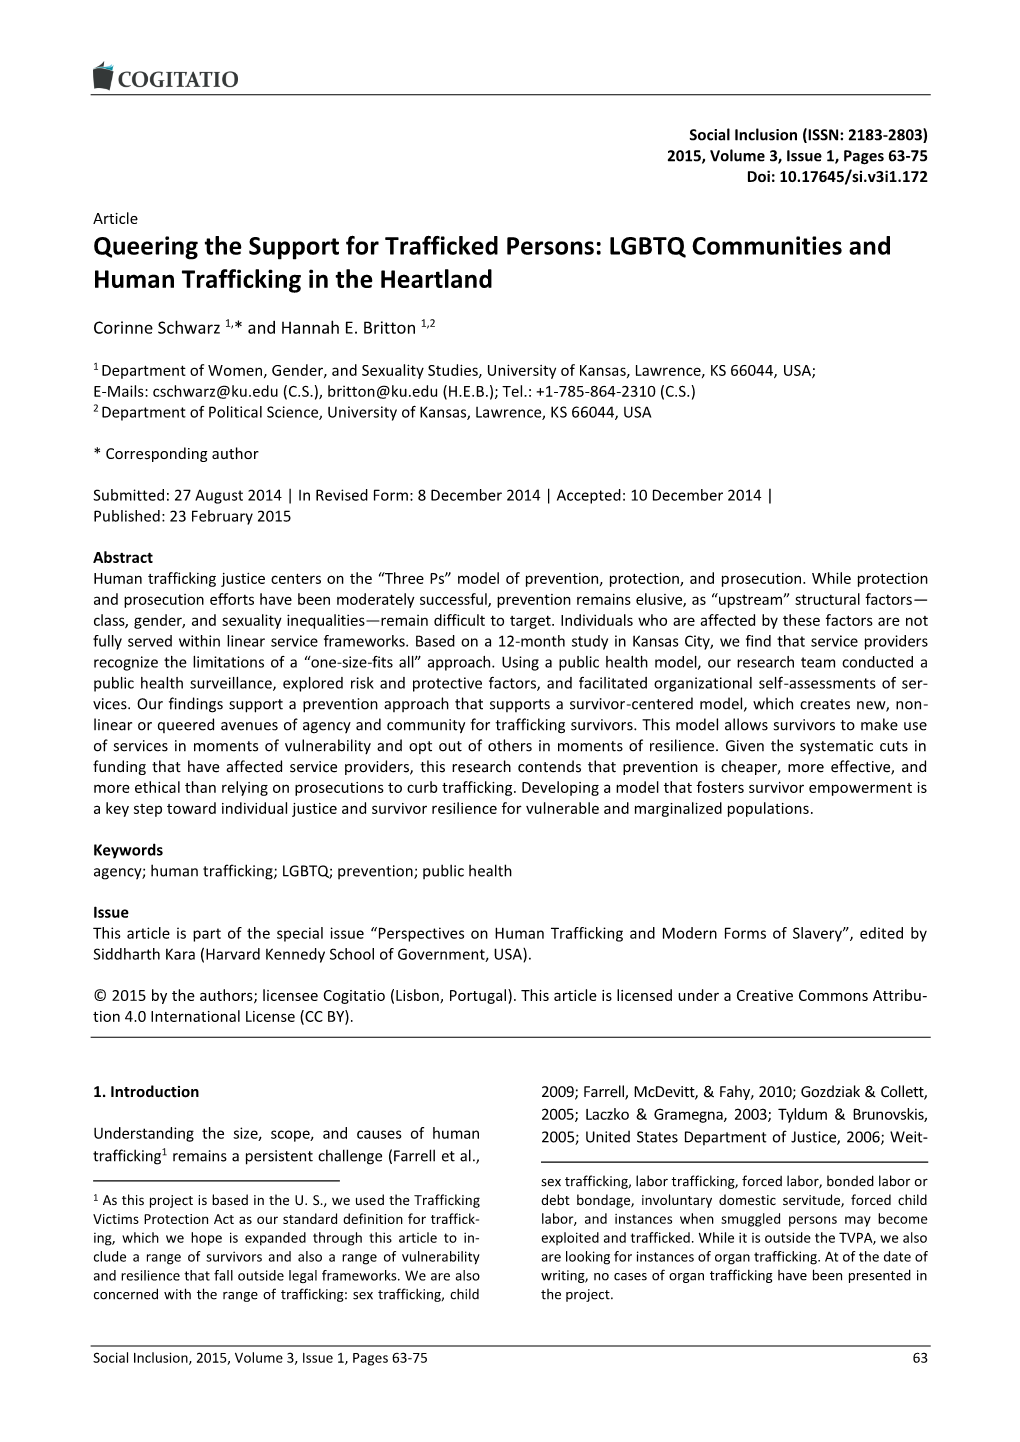 Queering the Support for Trafficked Persons: LGBTQ Communities and Human Trafficking in the Heartland